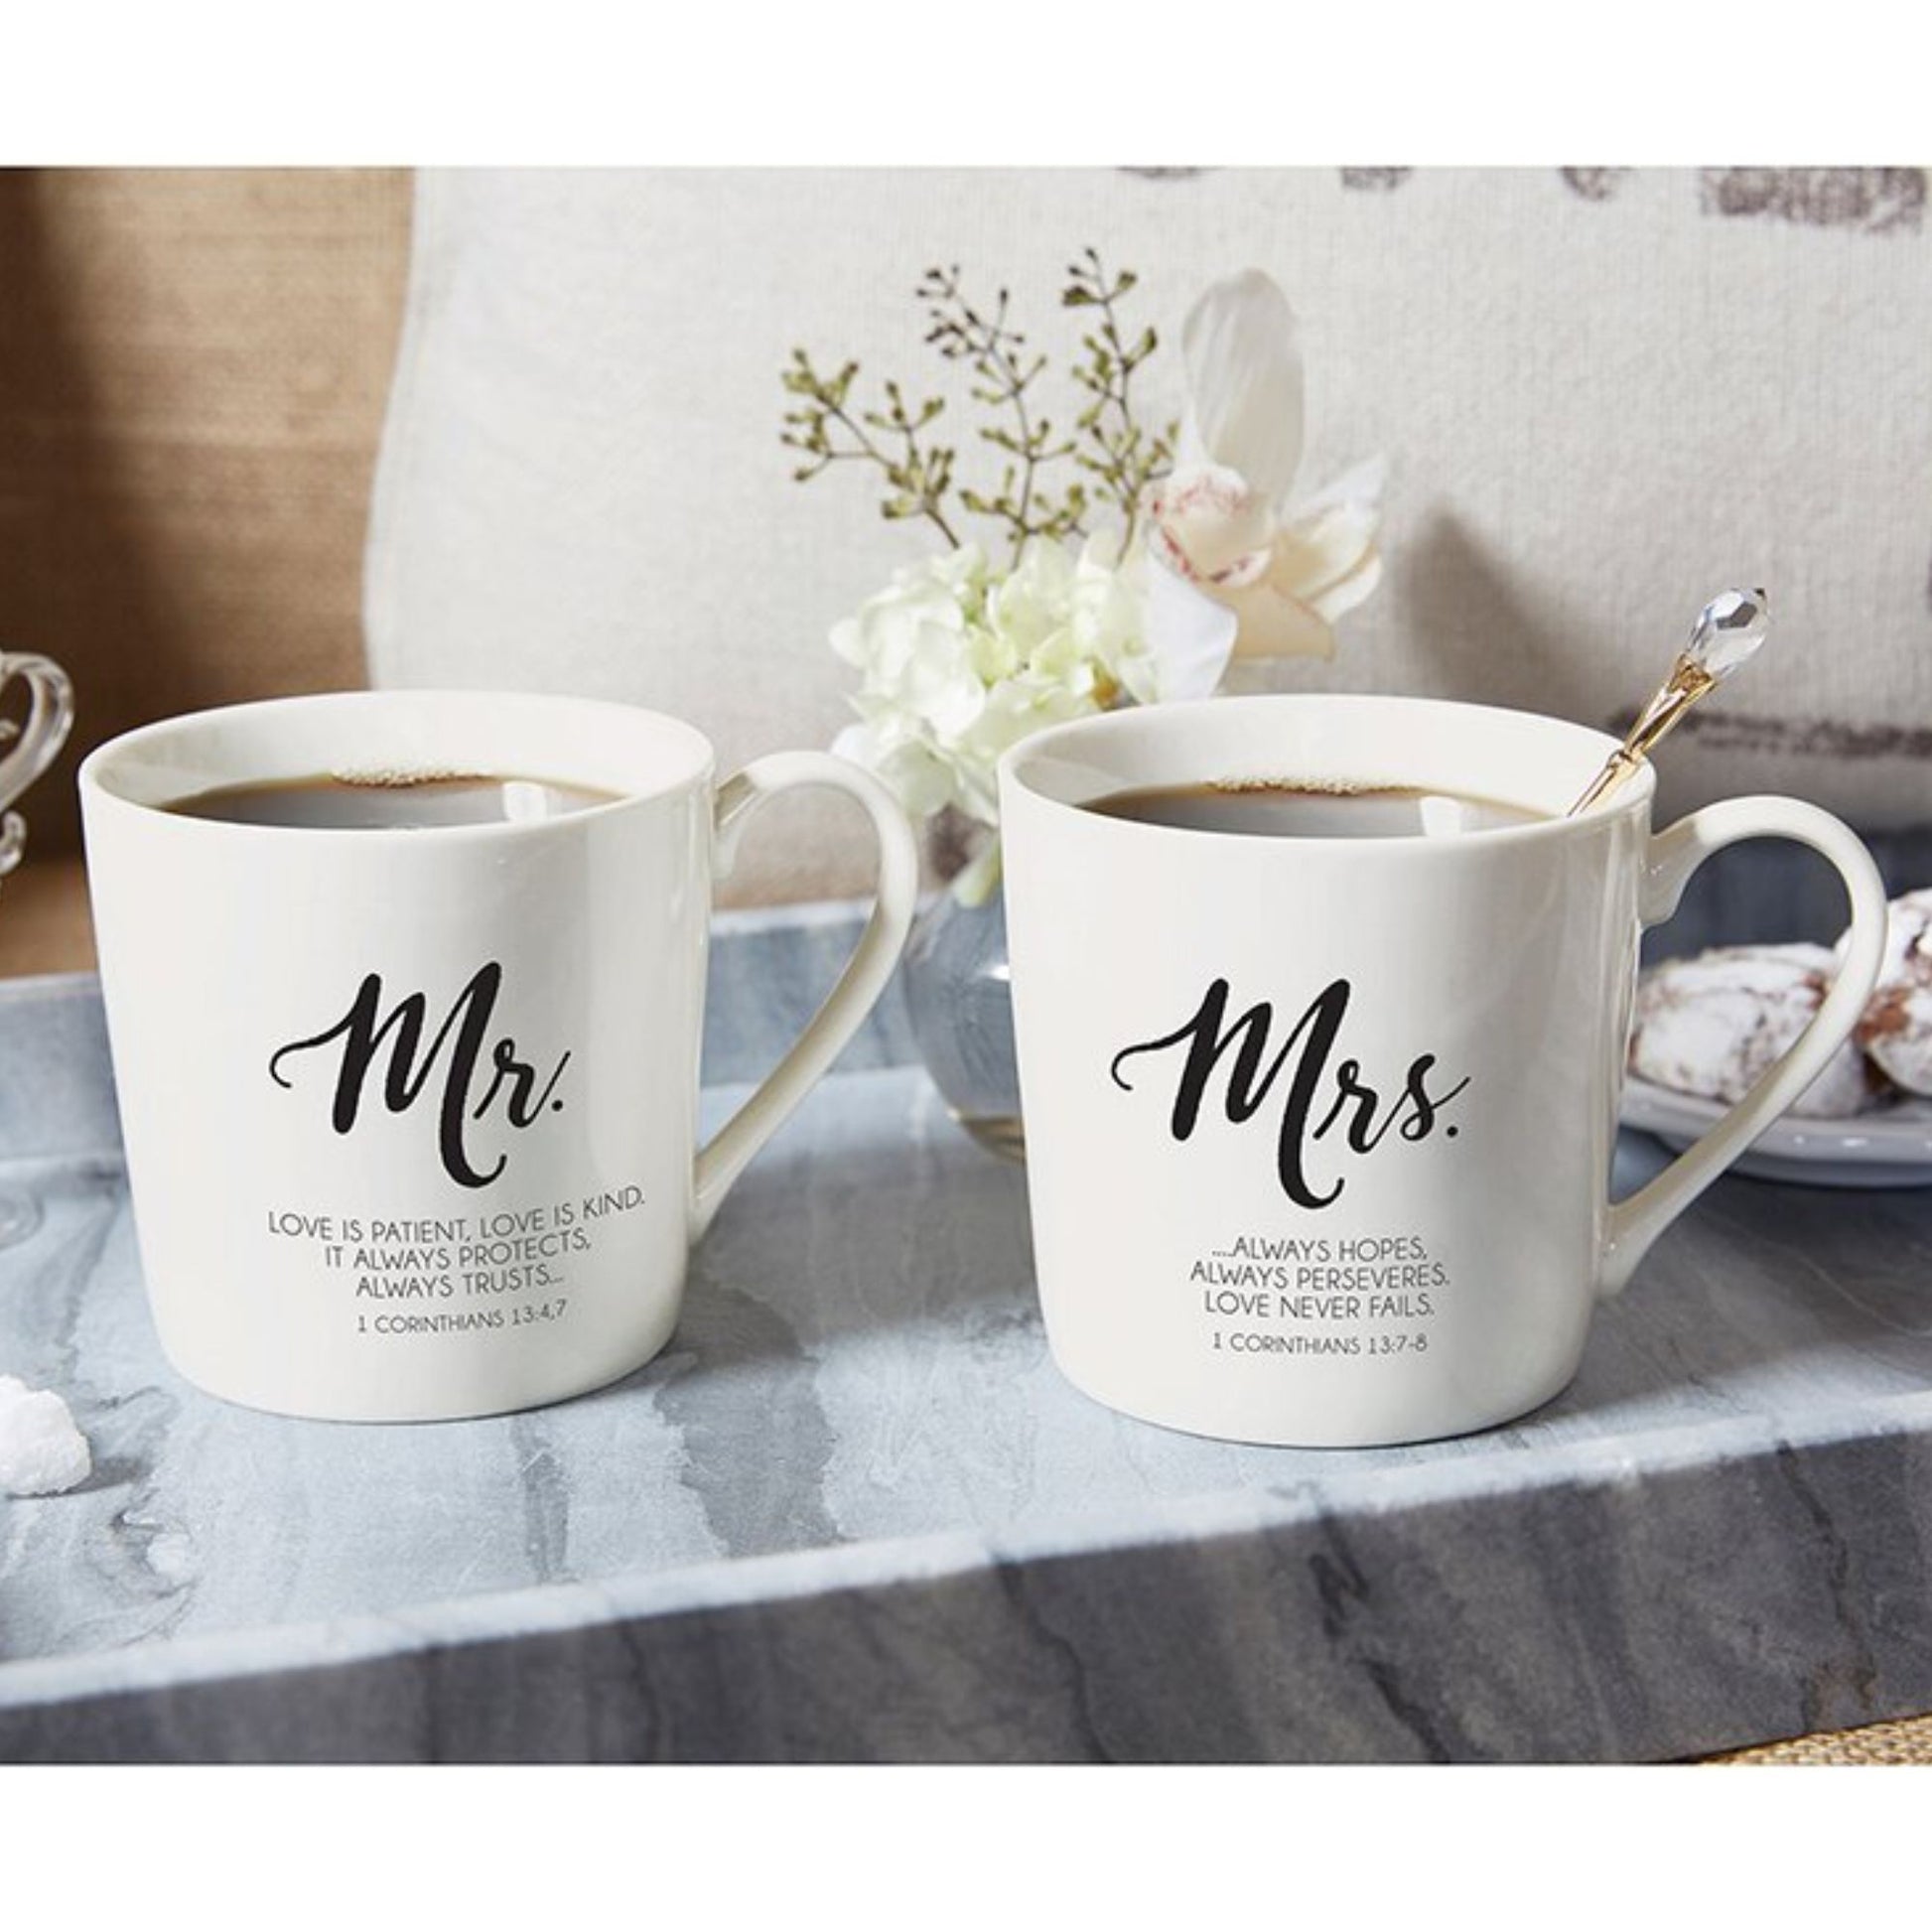 Mr & Mrs Cafe Coffee Mug Set - Love is Patient... Love Never Fails - 1 Corinthians - Inspirational Mugs | Wedding gift, Anniversary gift, Couples gift | shown with coffee |  oak7west.com